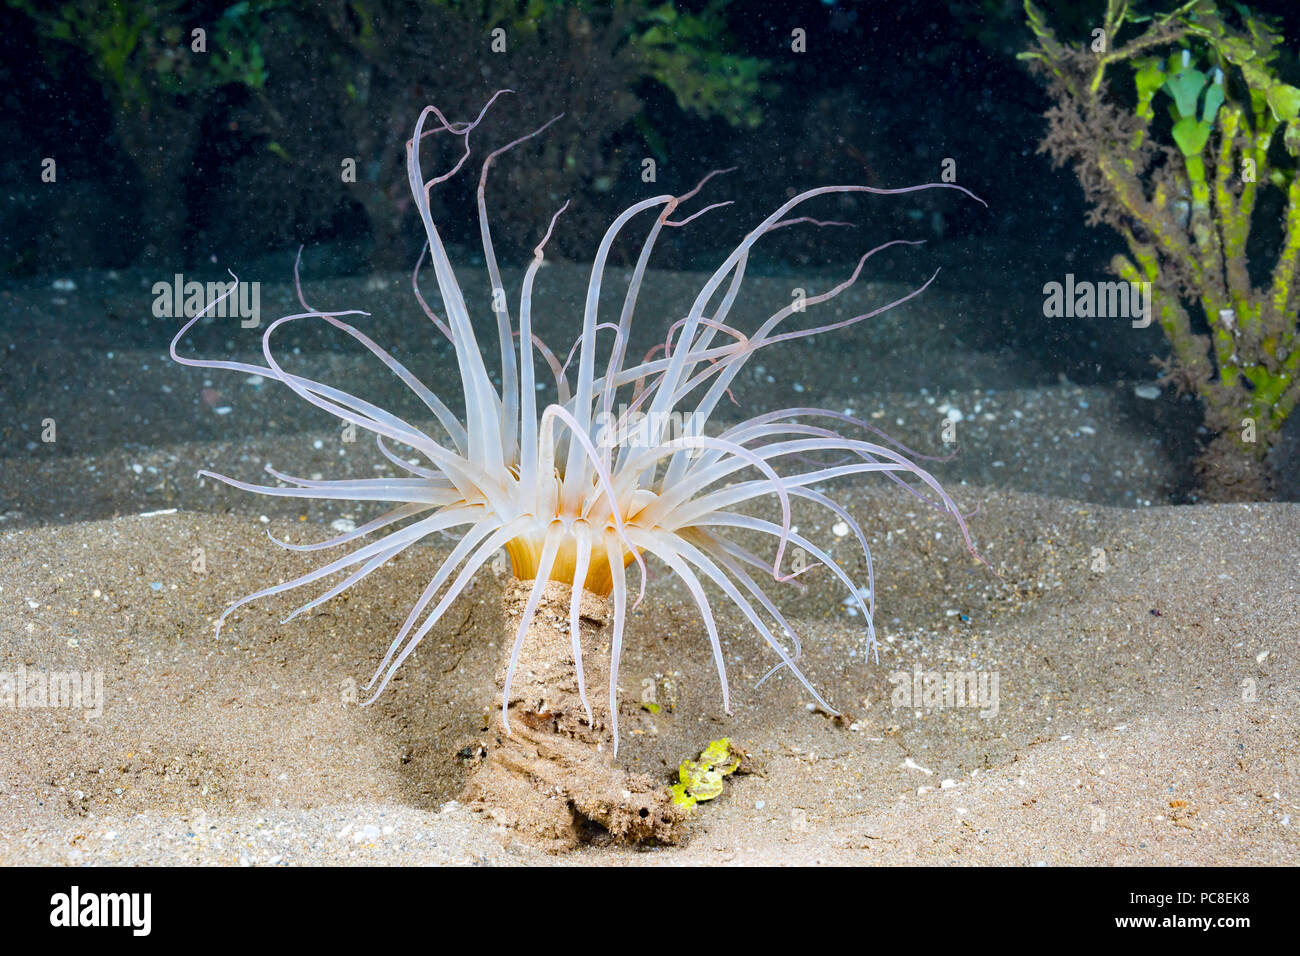 This tube anemone, Arachnanthus sp, is only visible at night and will retract when illuminated, Hawaii. Stock Photo